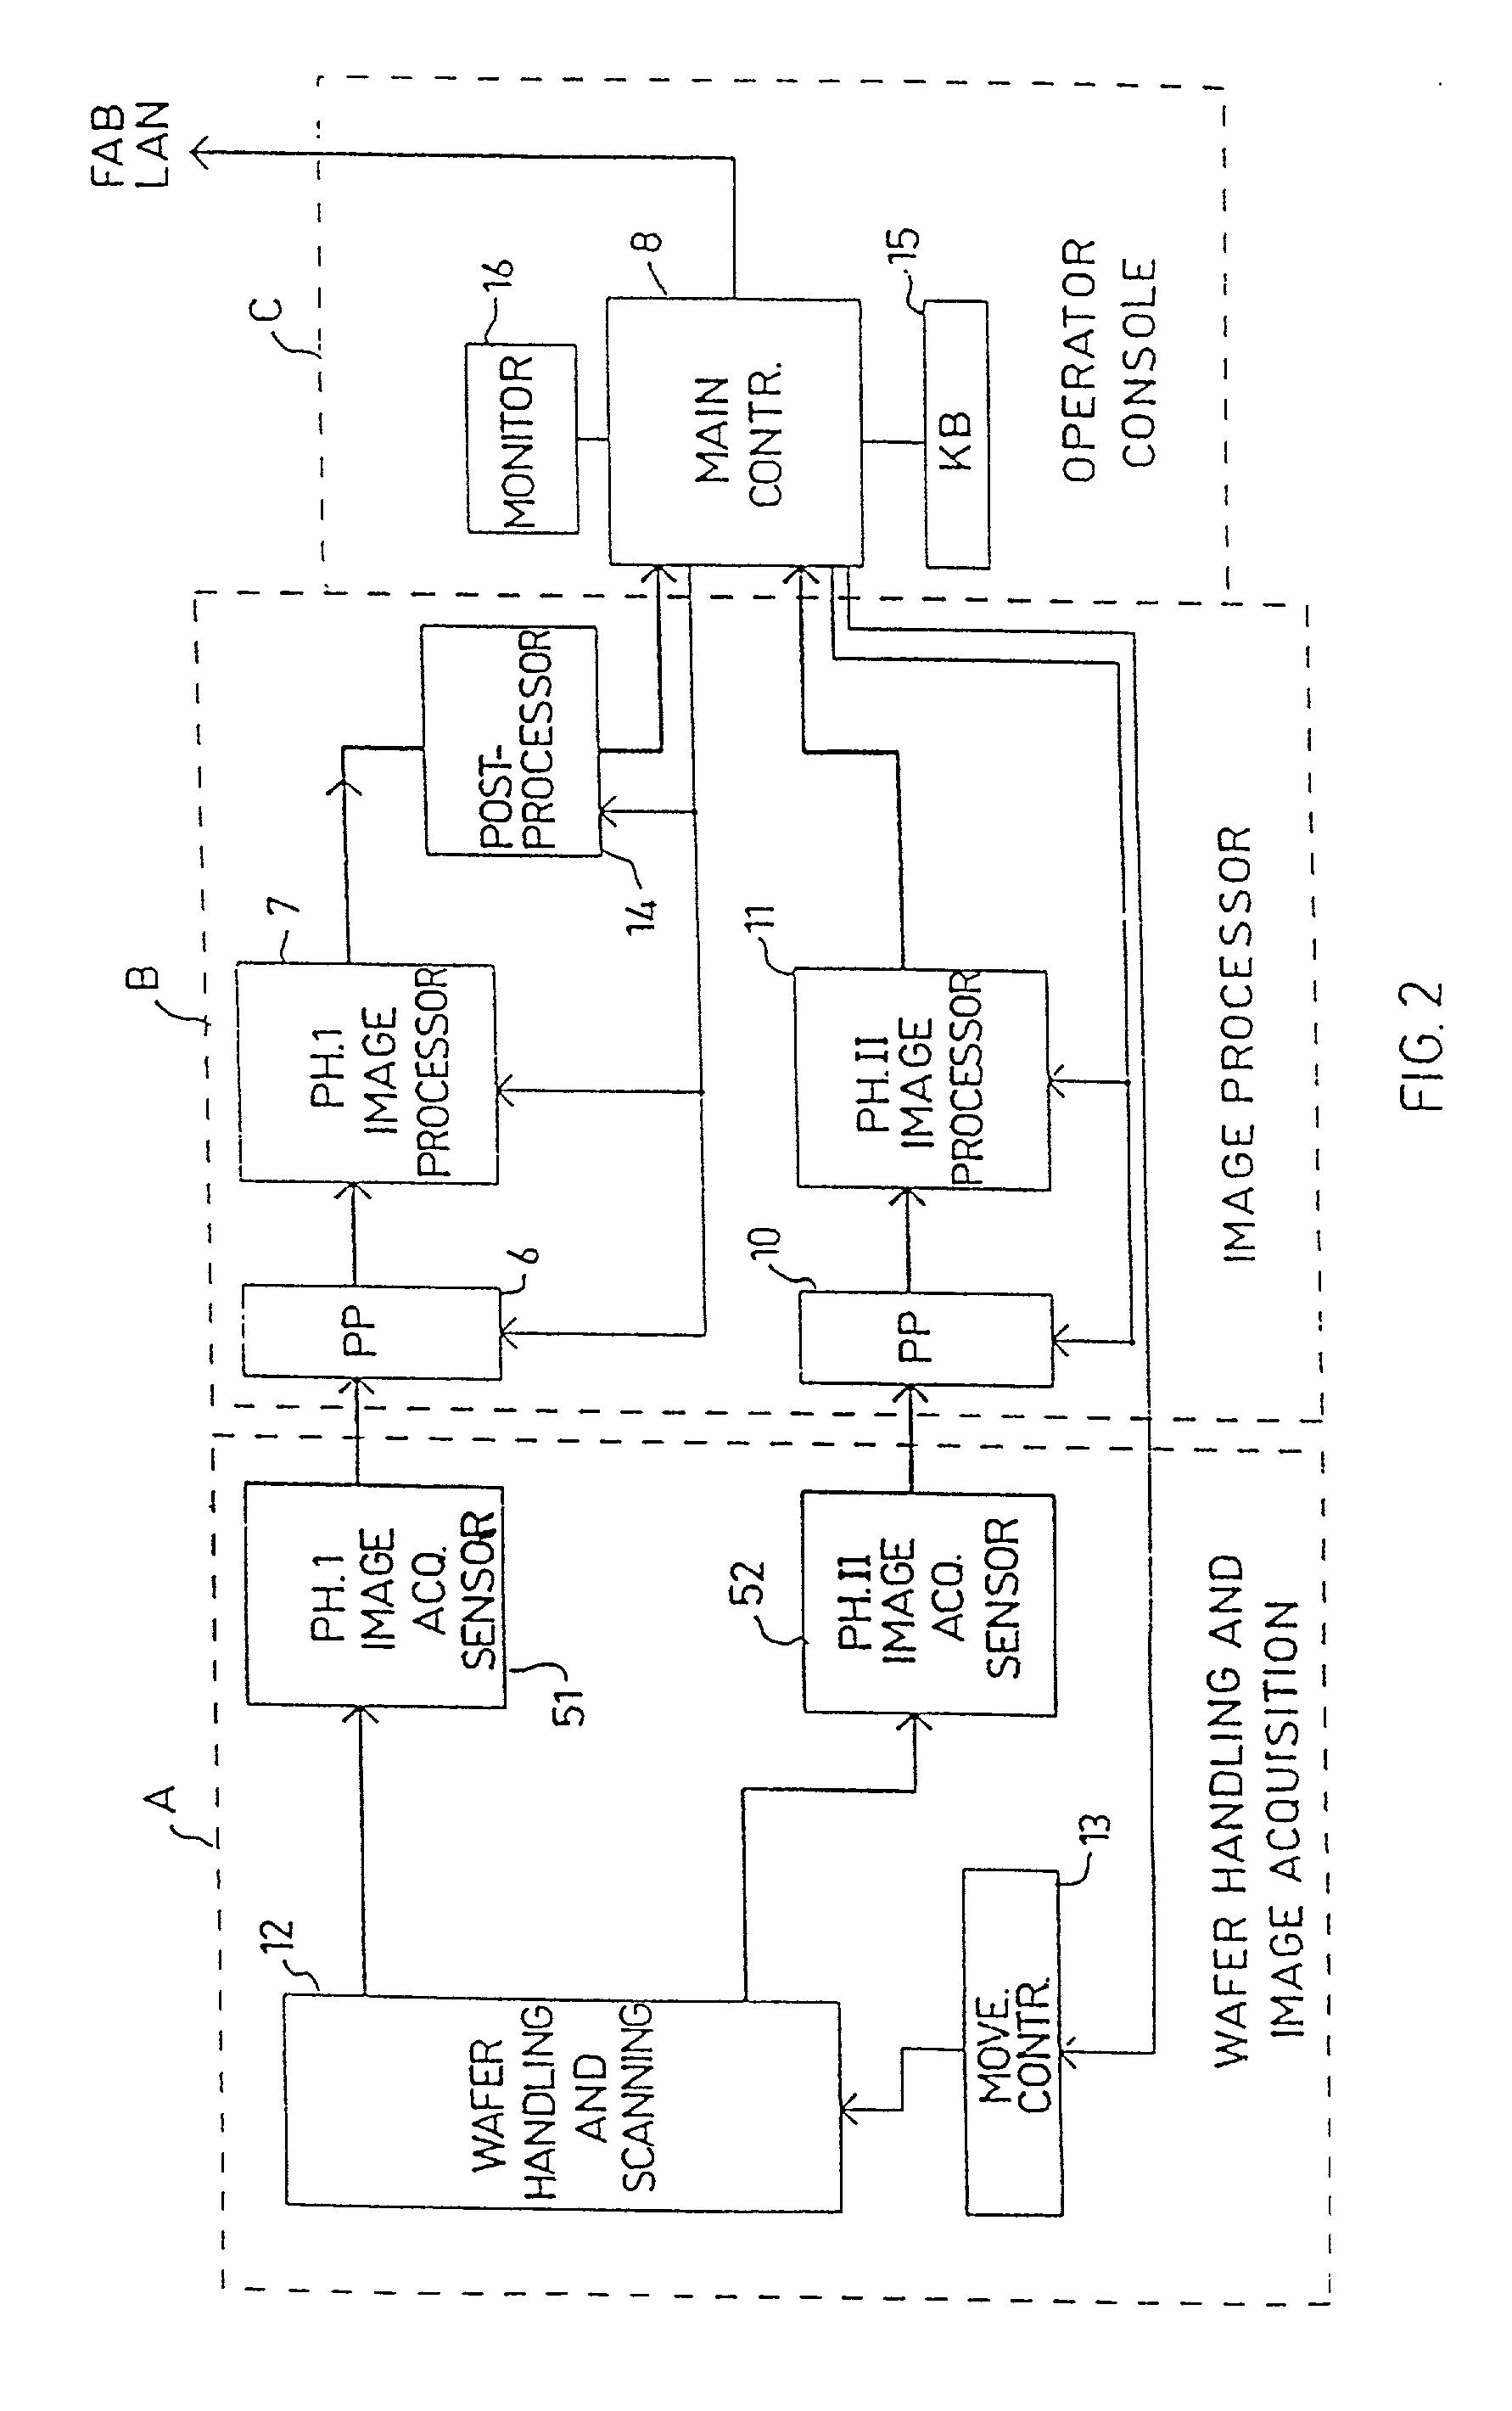 Optical inspection apparatus for defect detection